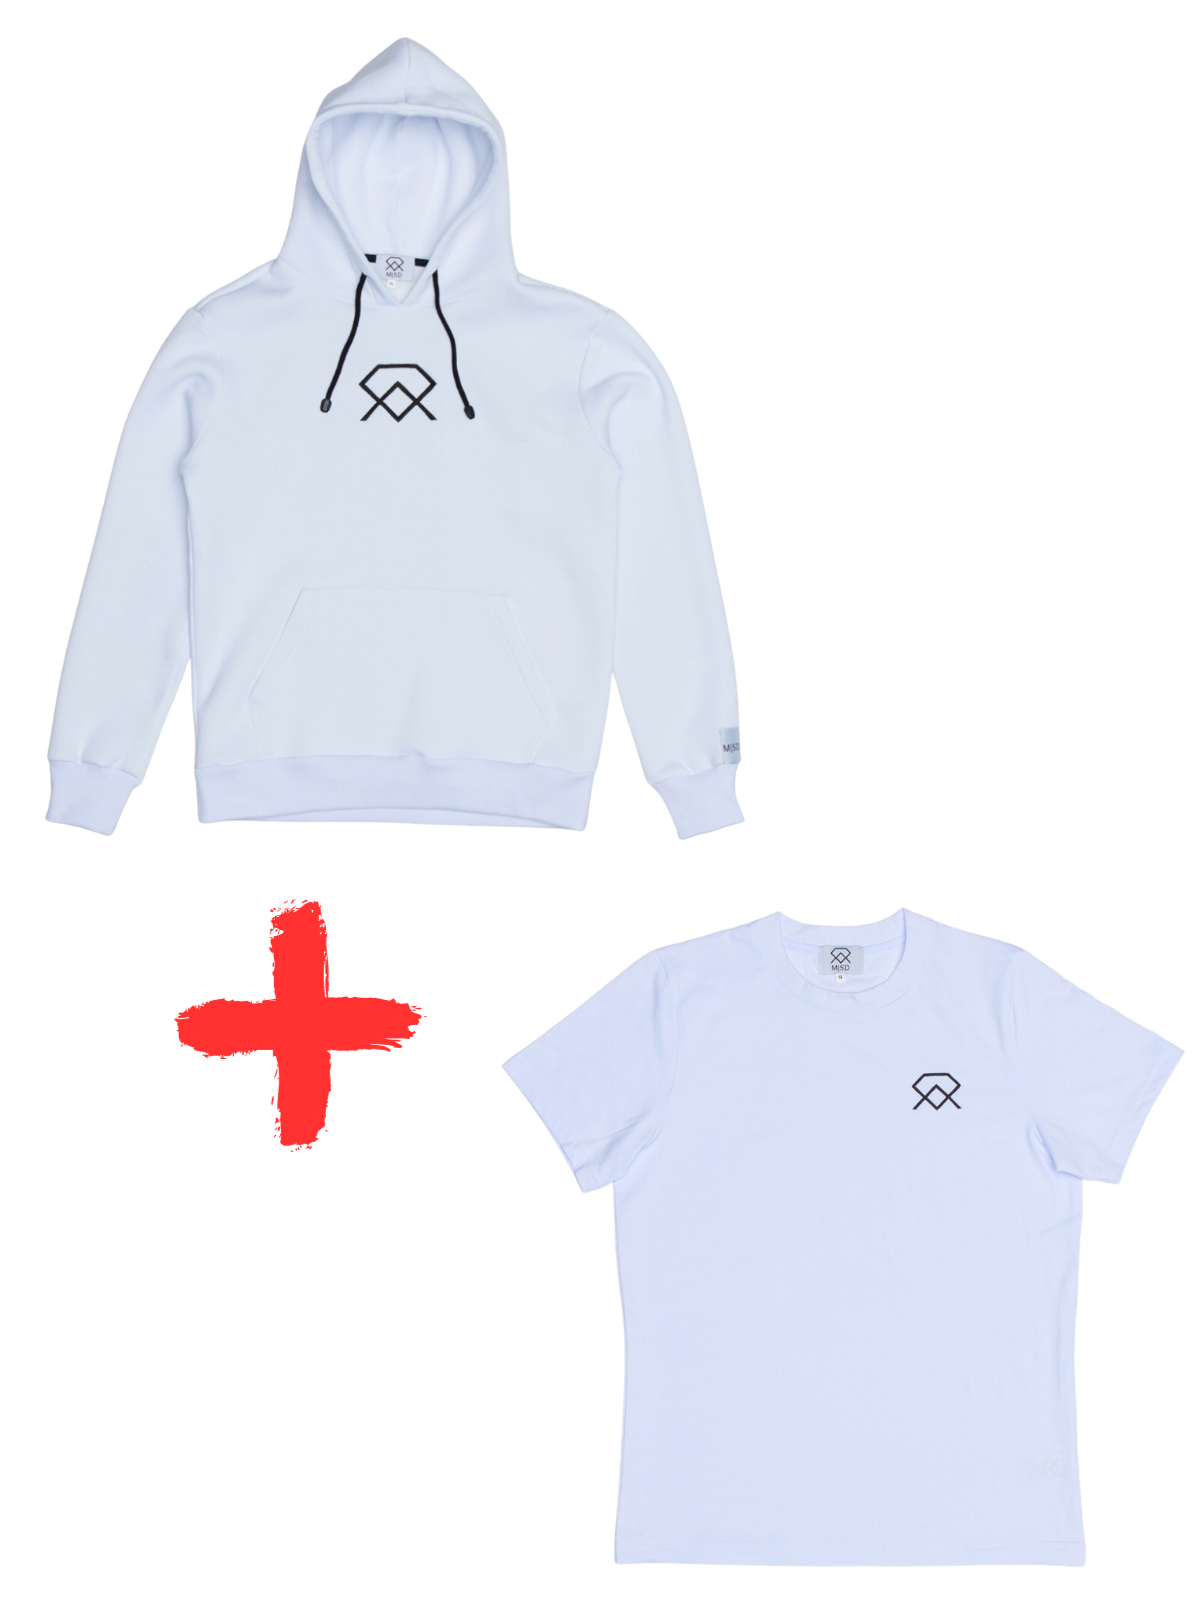 OUTFIT-SET A: HOODIE & T-SHIRT